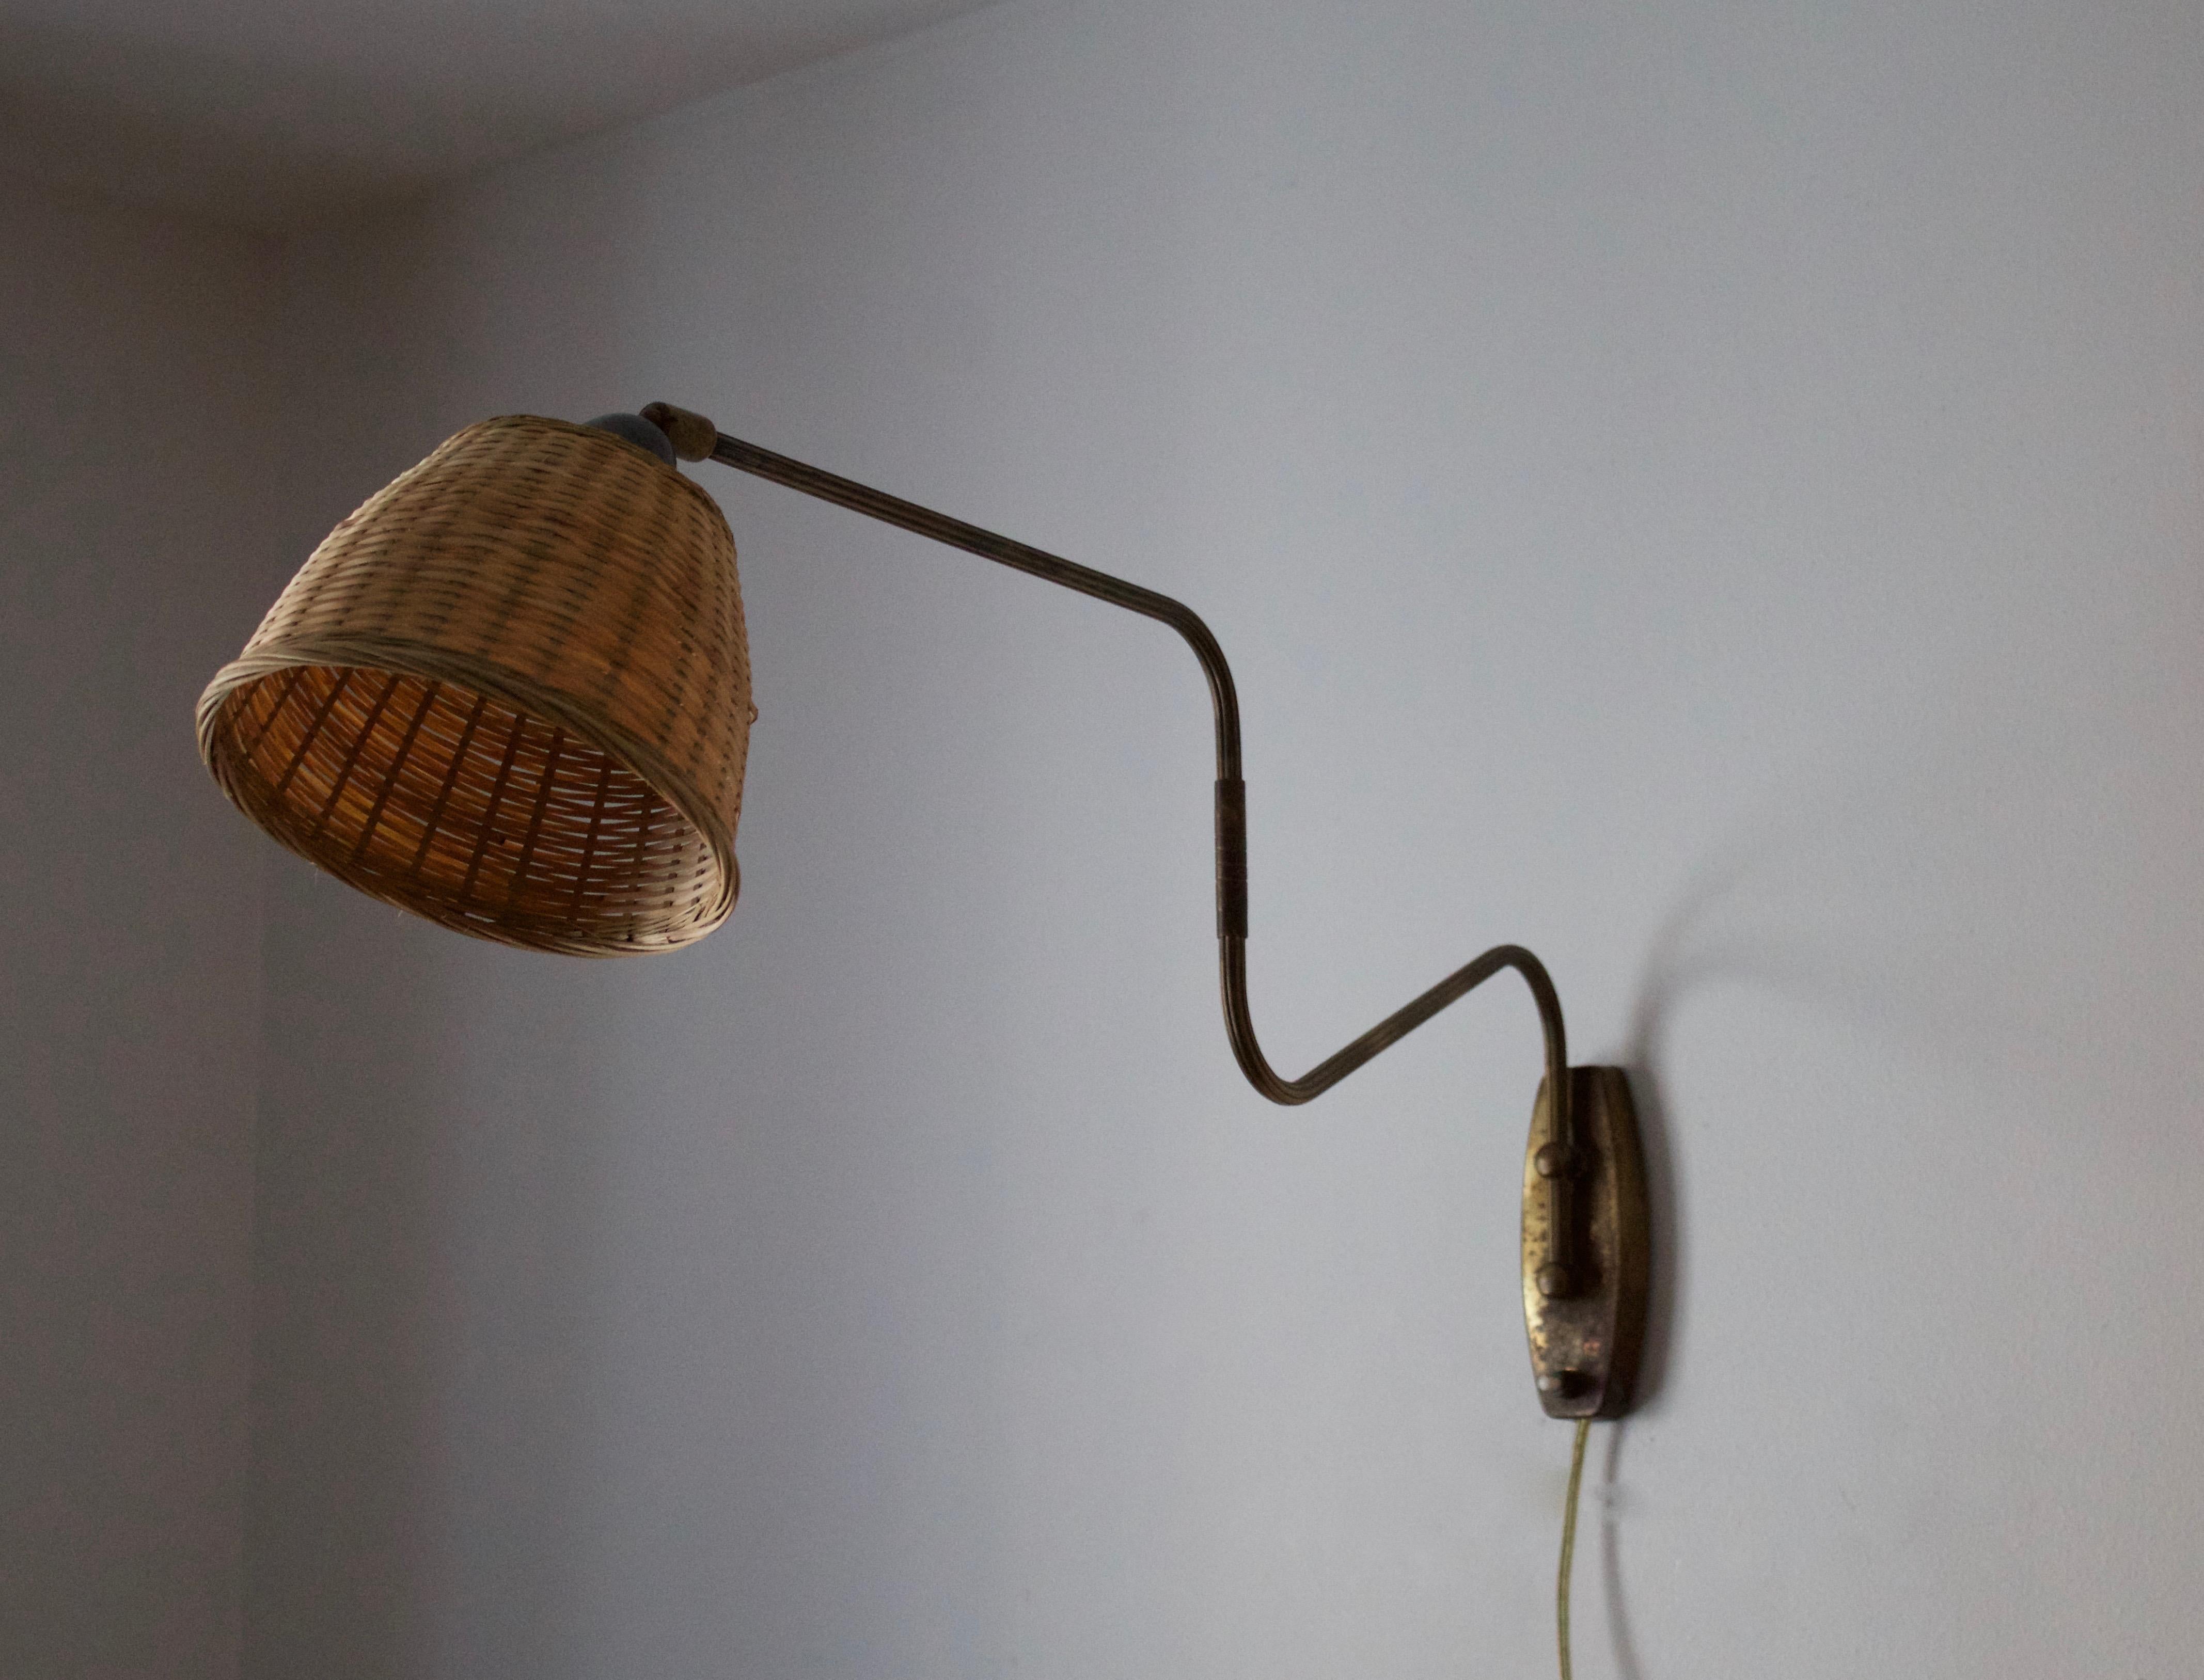 A small functionalist wall light / task light, designed and produced in Denmark, 1940s. Features brass and Bakelite socket. Assorted Vintage rattan lampshade.

Stated dimensions with lampshade attached as is illustrated in the primary image.